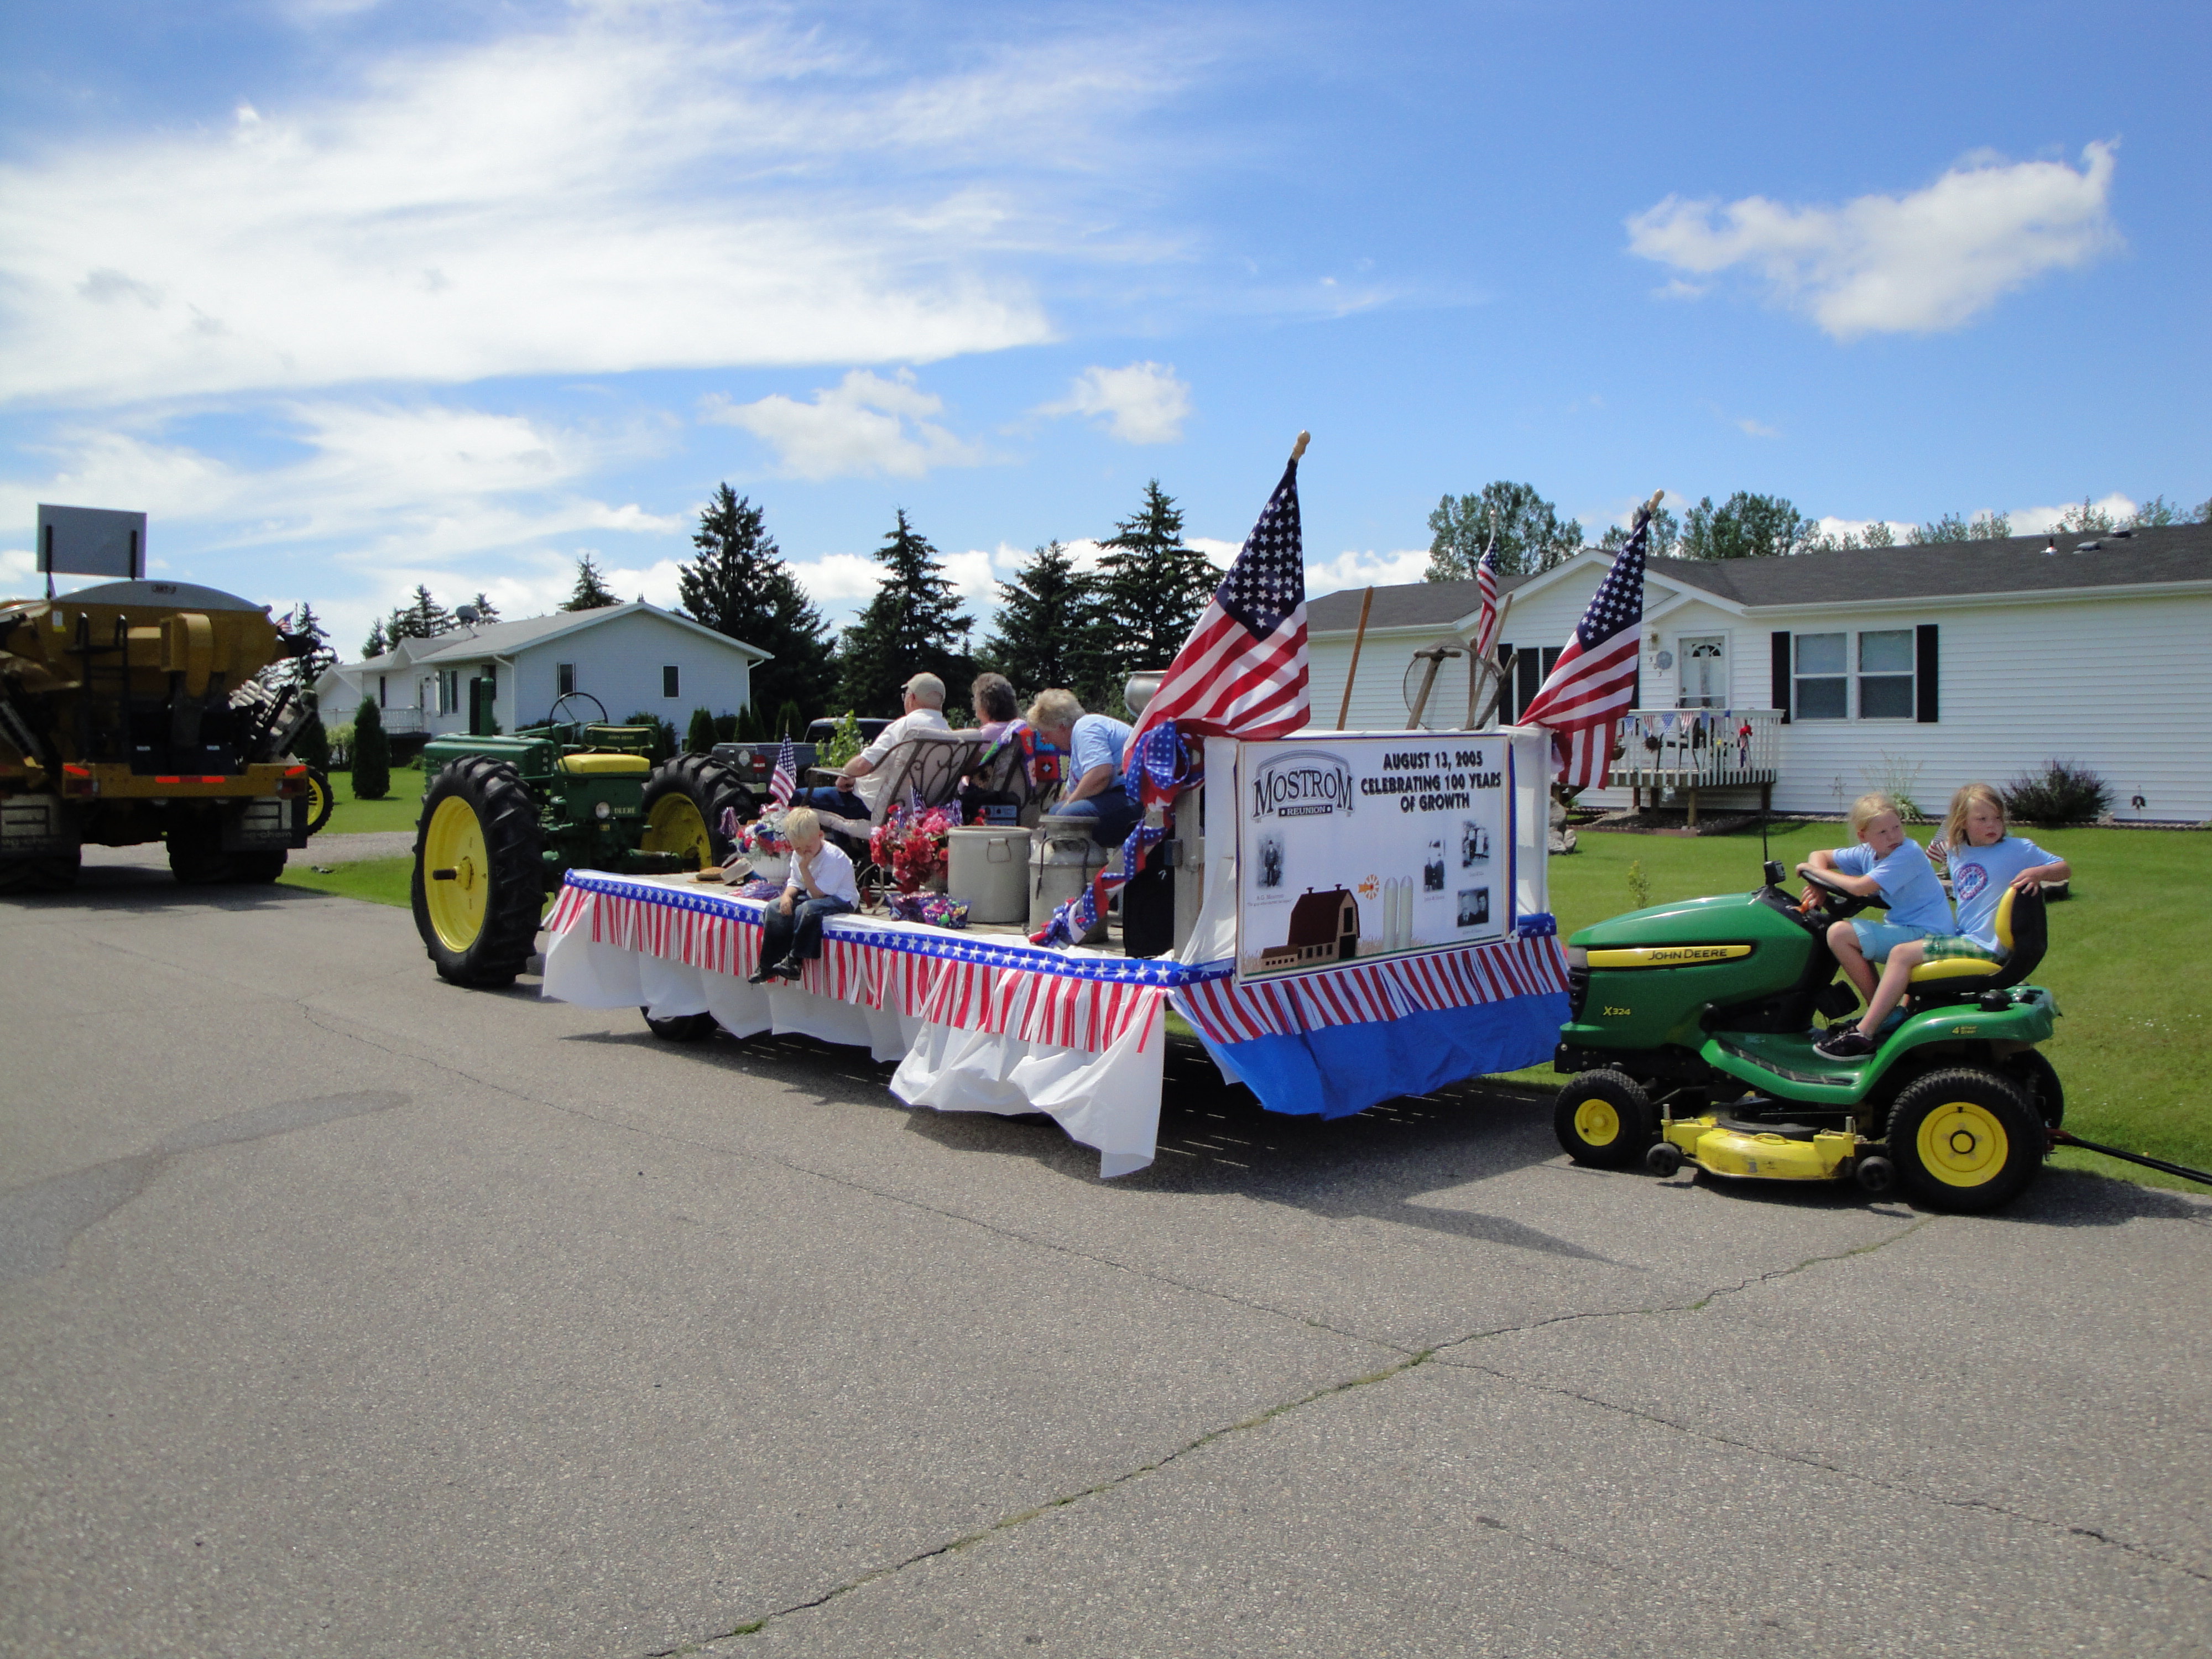 Olivia and Sofia driving JD mower in Oklee parade